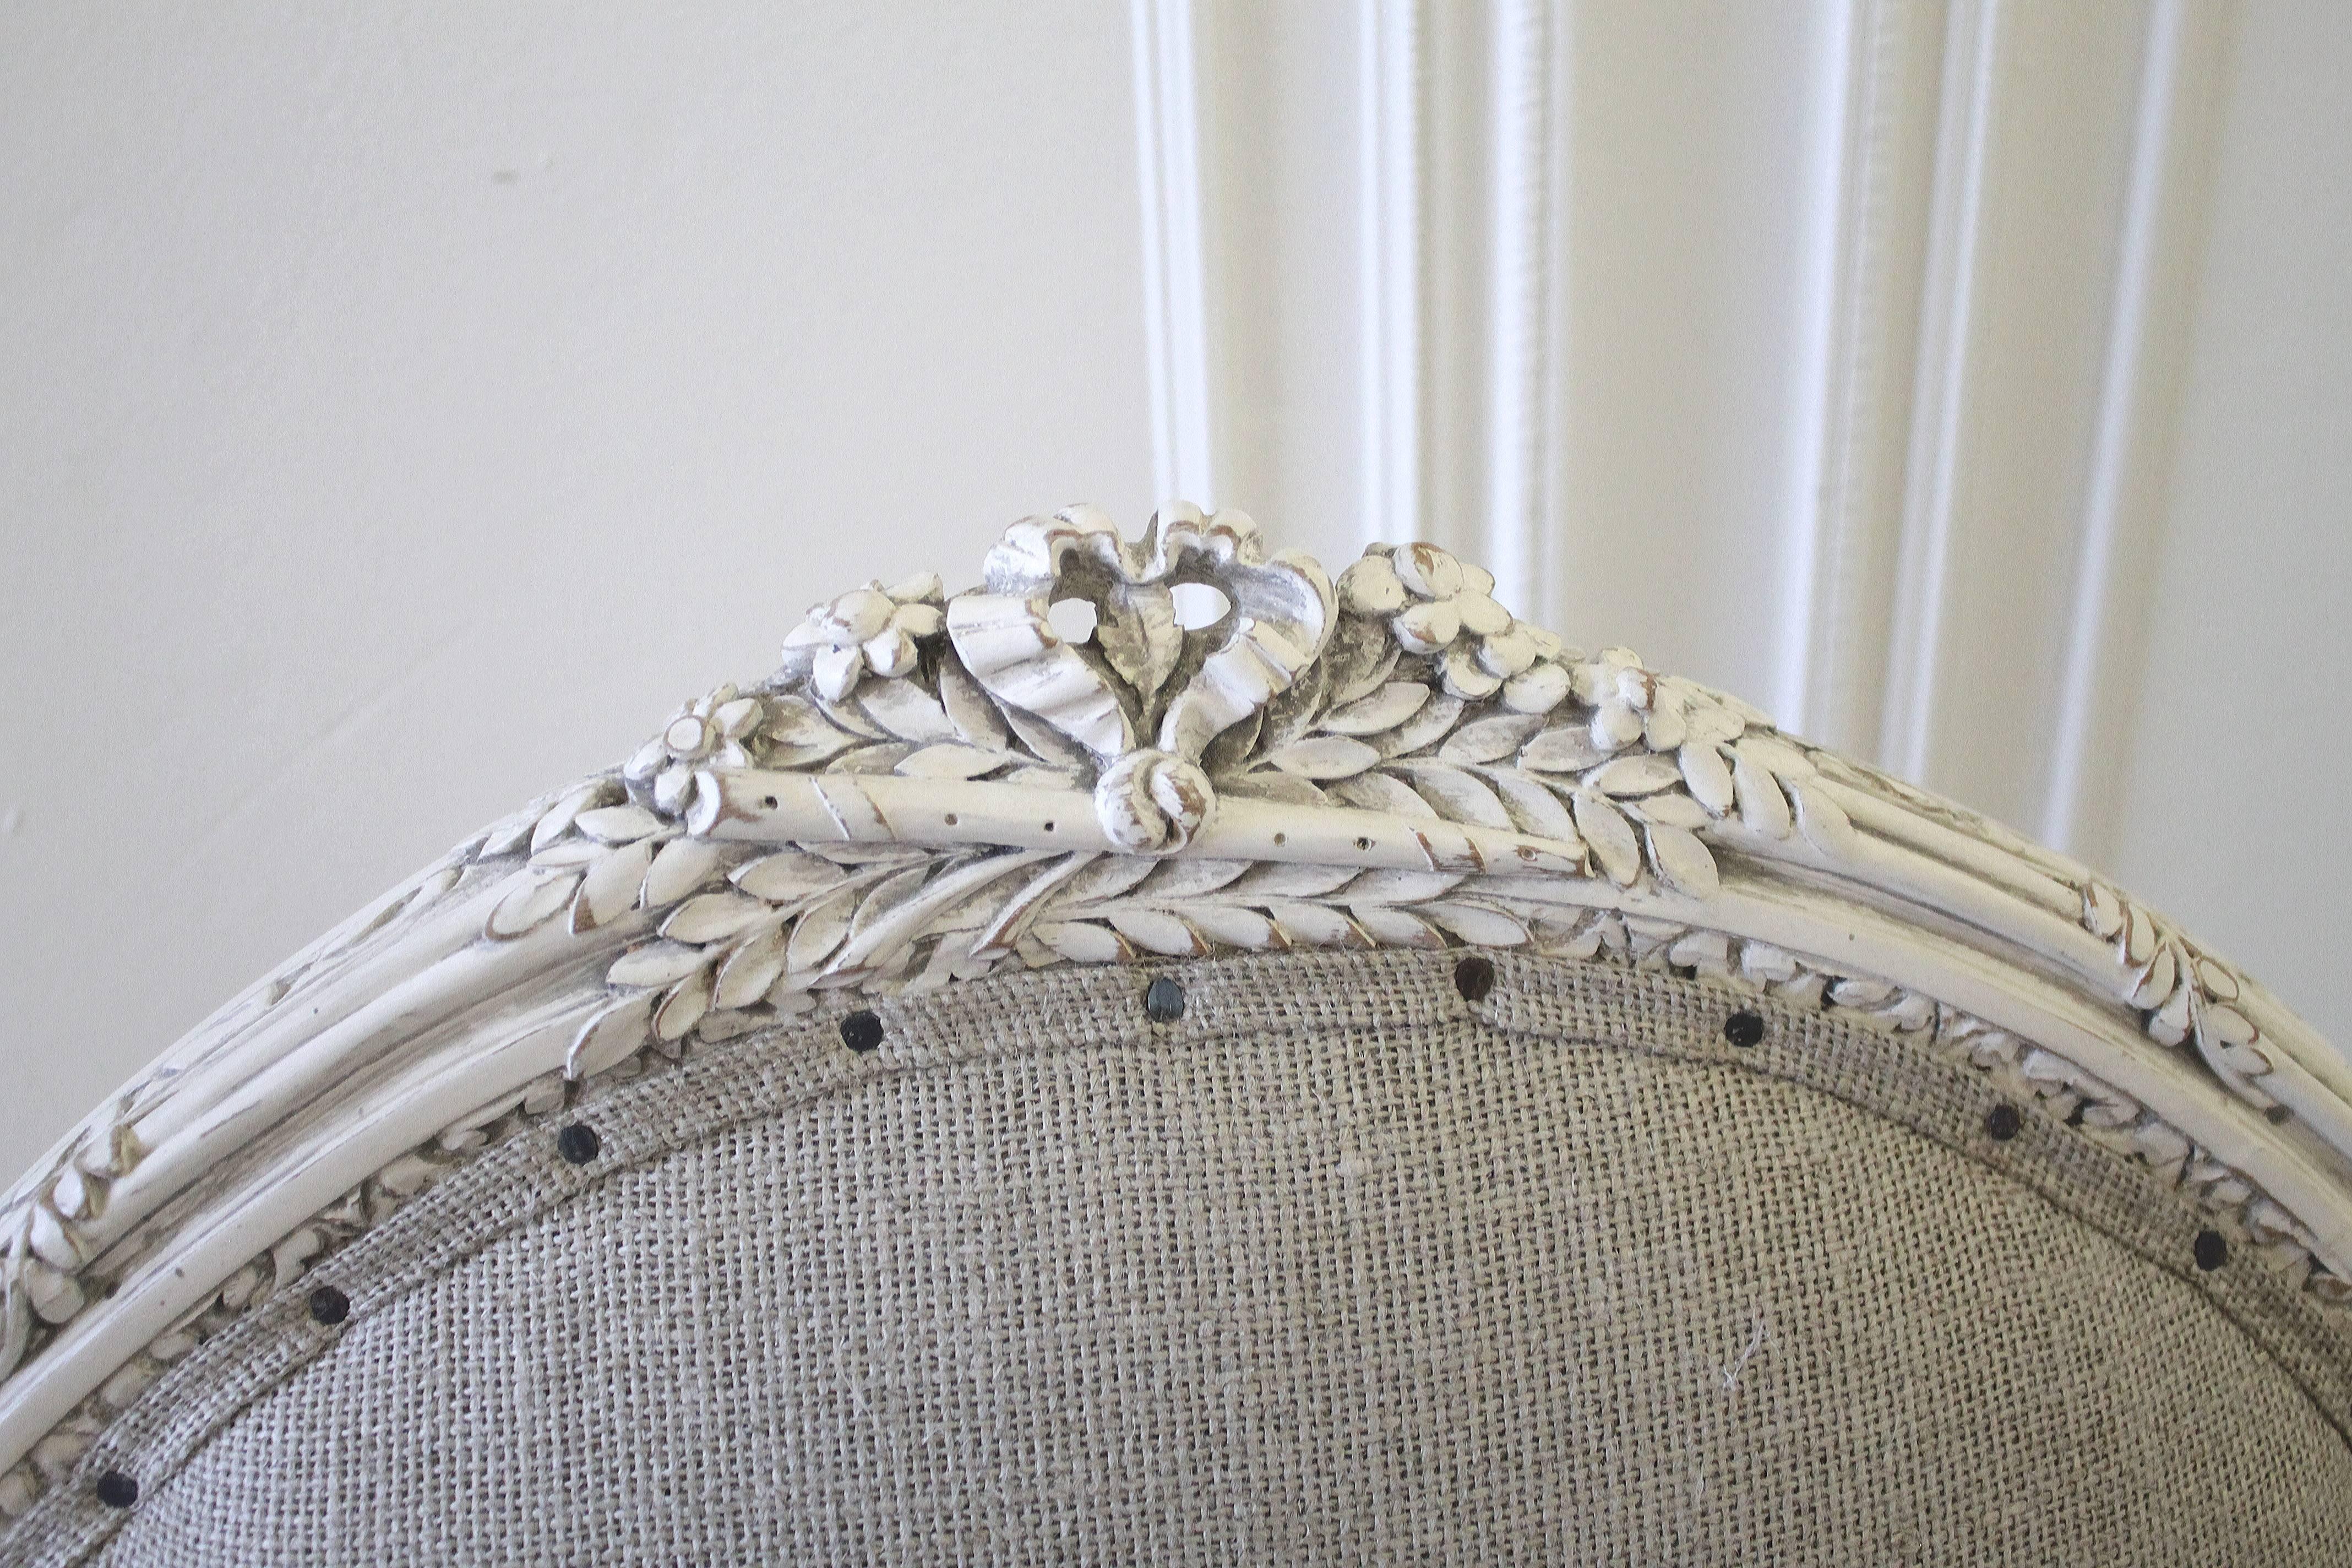 French Louis XVI style arm chair, with a beautiful ribbon, and floral carvings and painted in a soft white, with subtle distressing, and an antique glazed finish, we reupholstered these in our 18oz nubby 100% organic Irish linen. Finished with